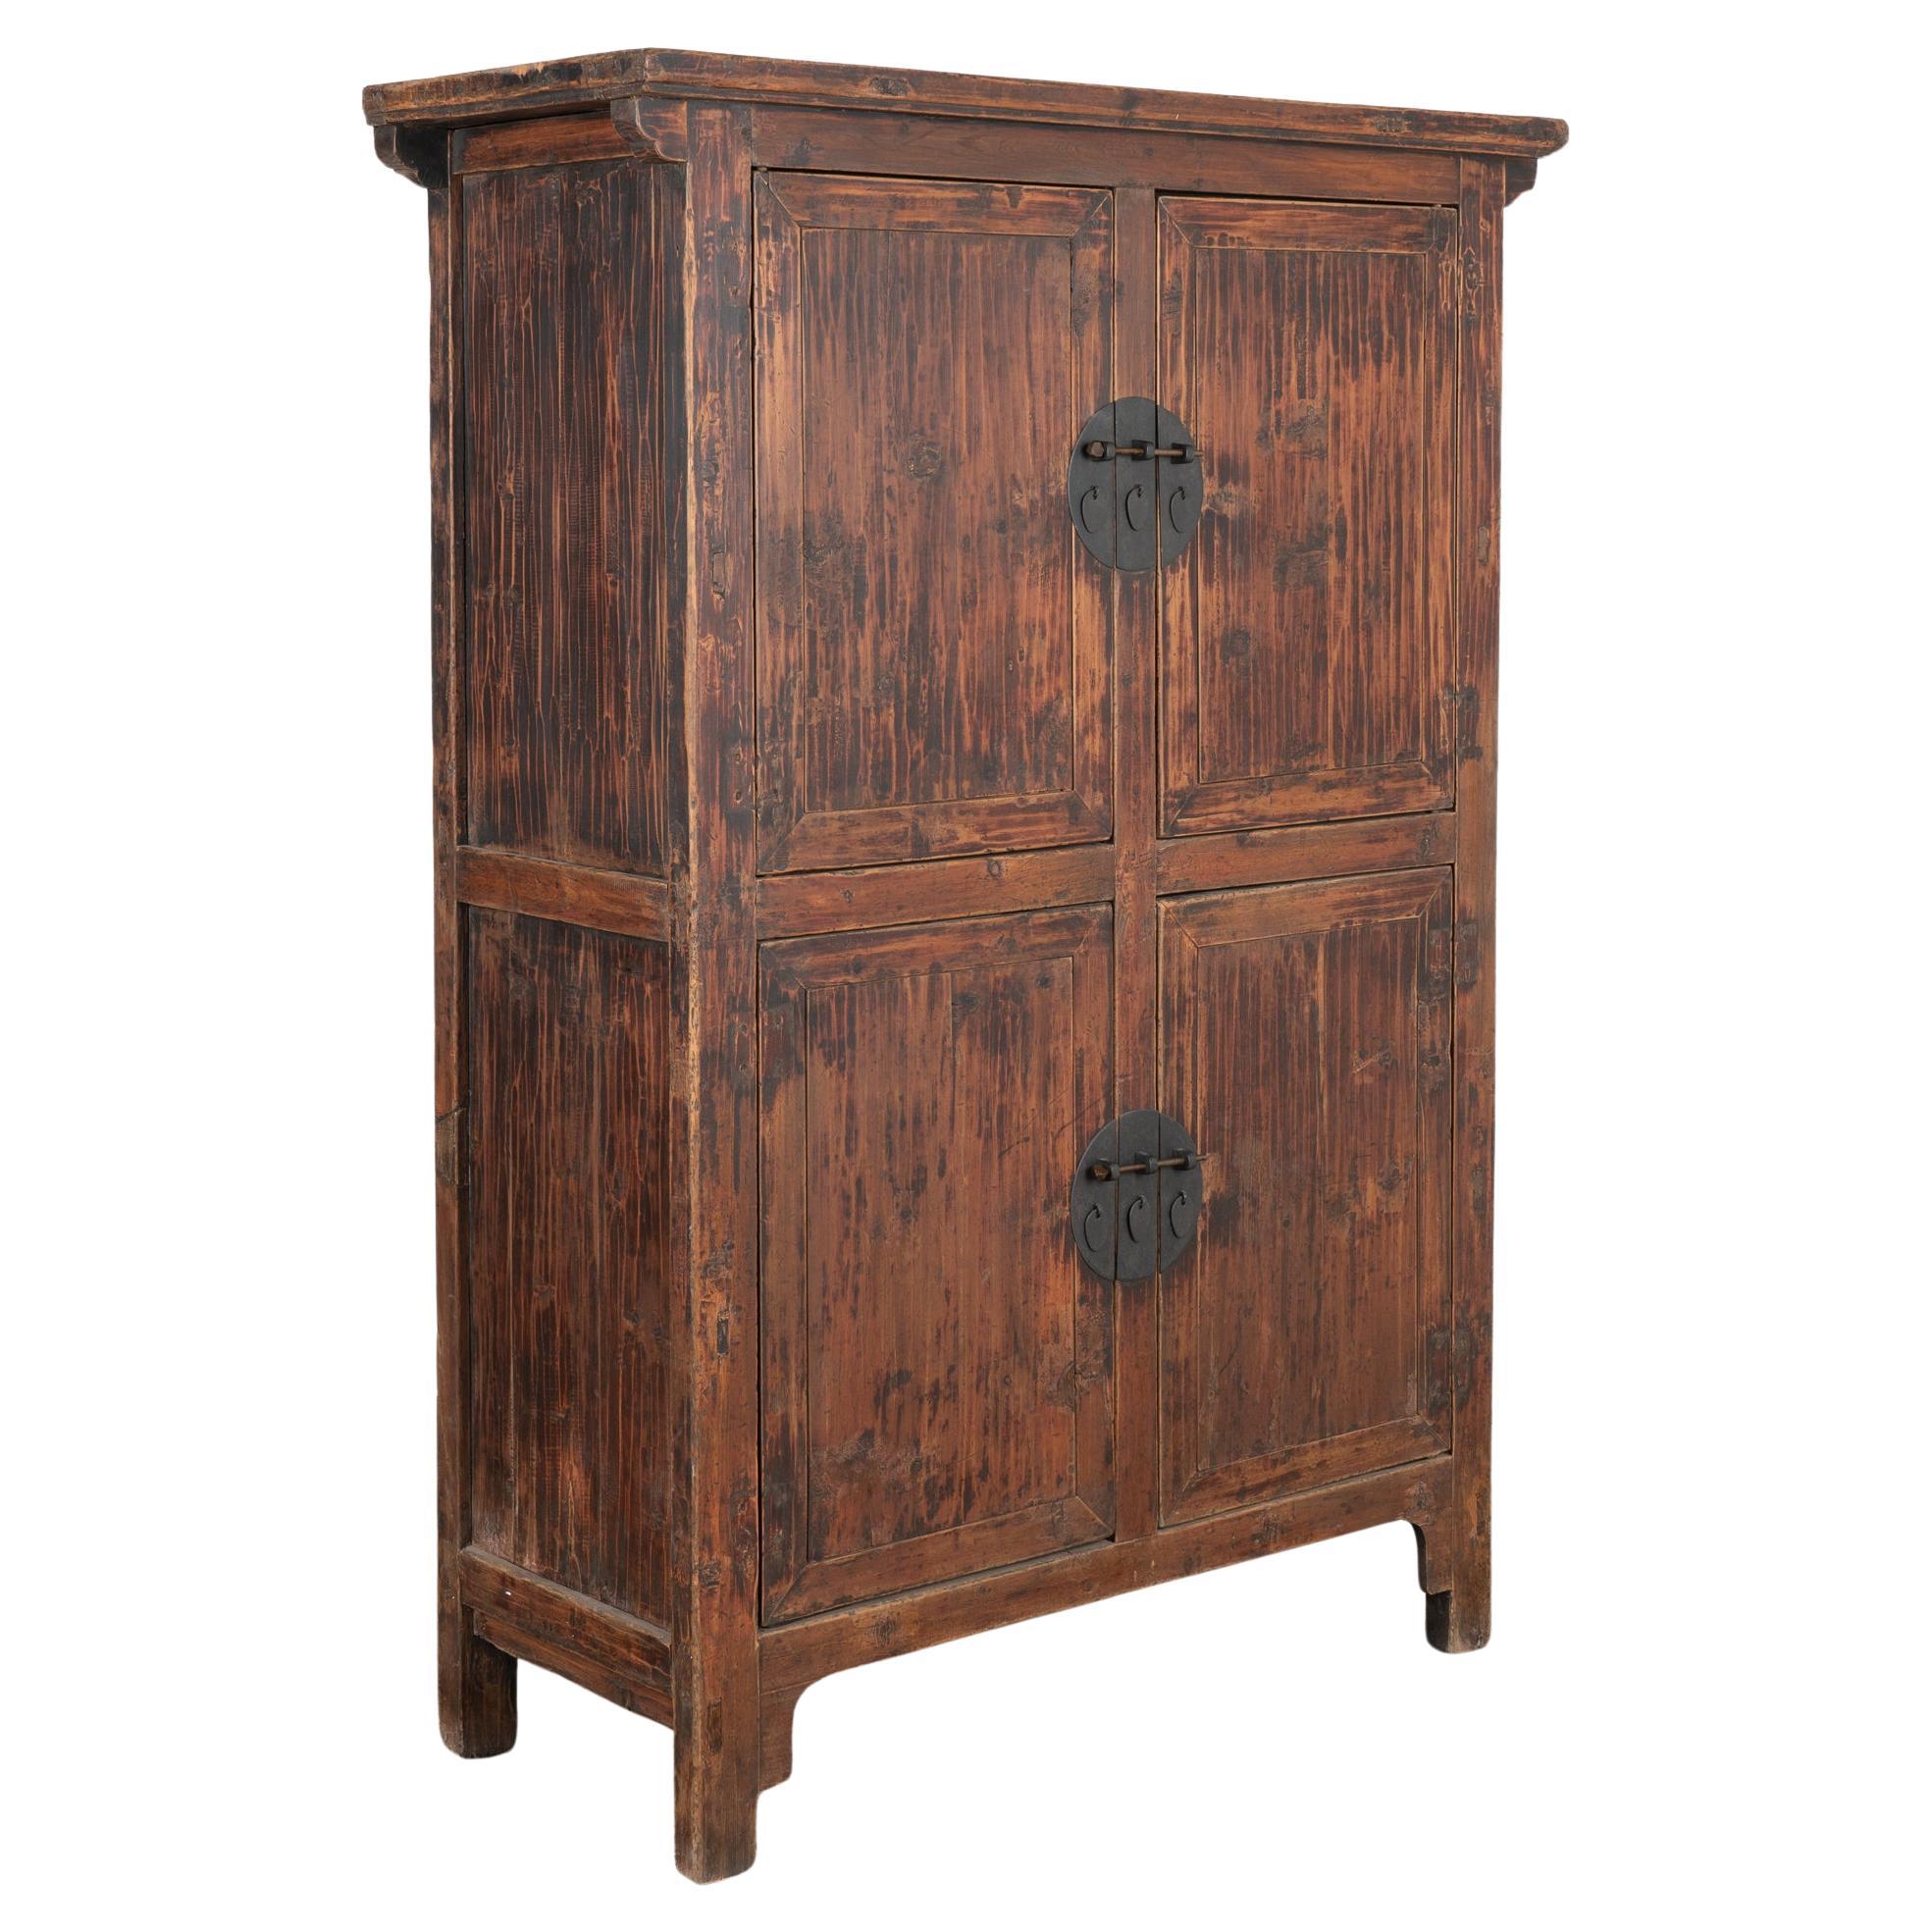 Chinese Cabinet Armoire, circa 1860-80